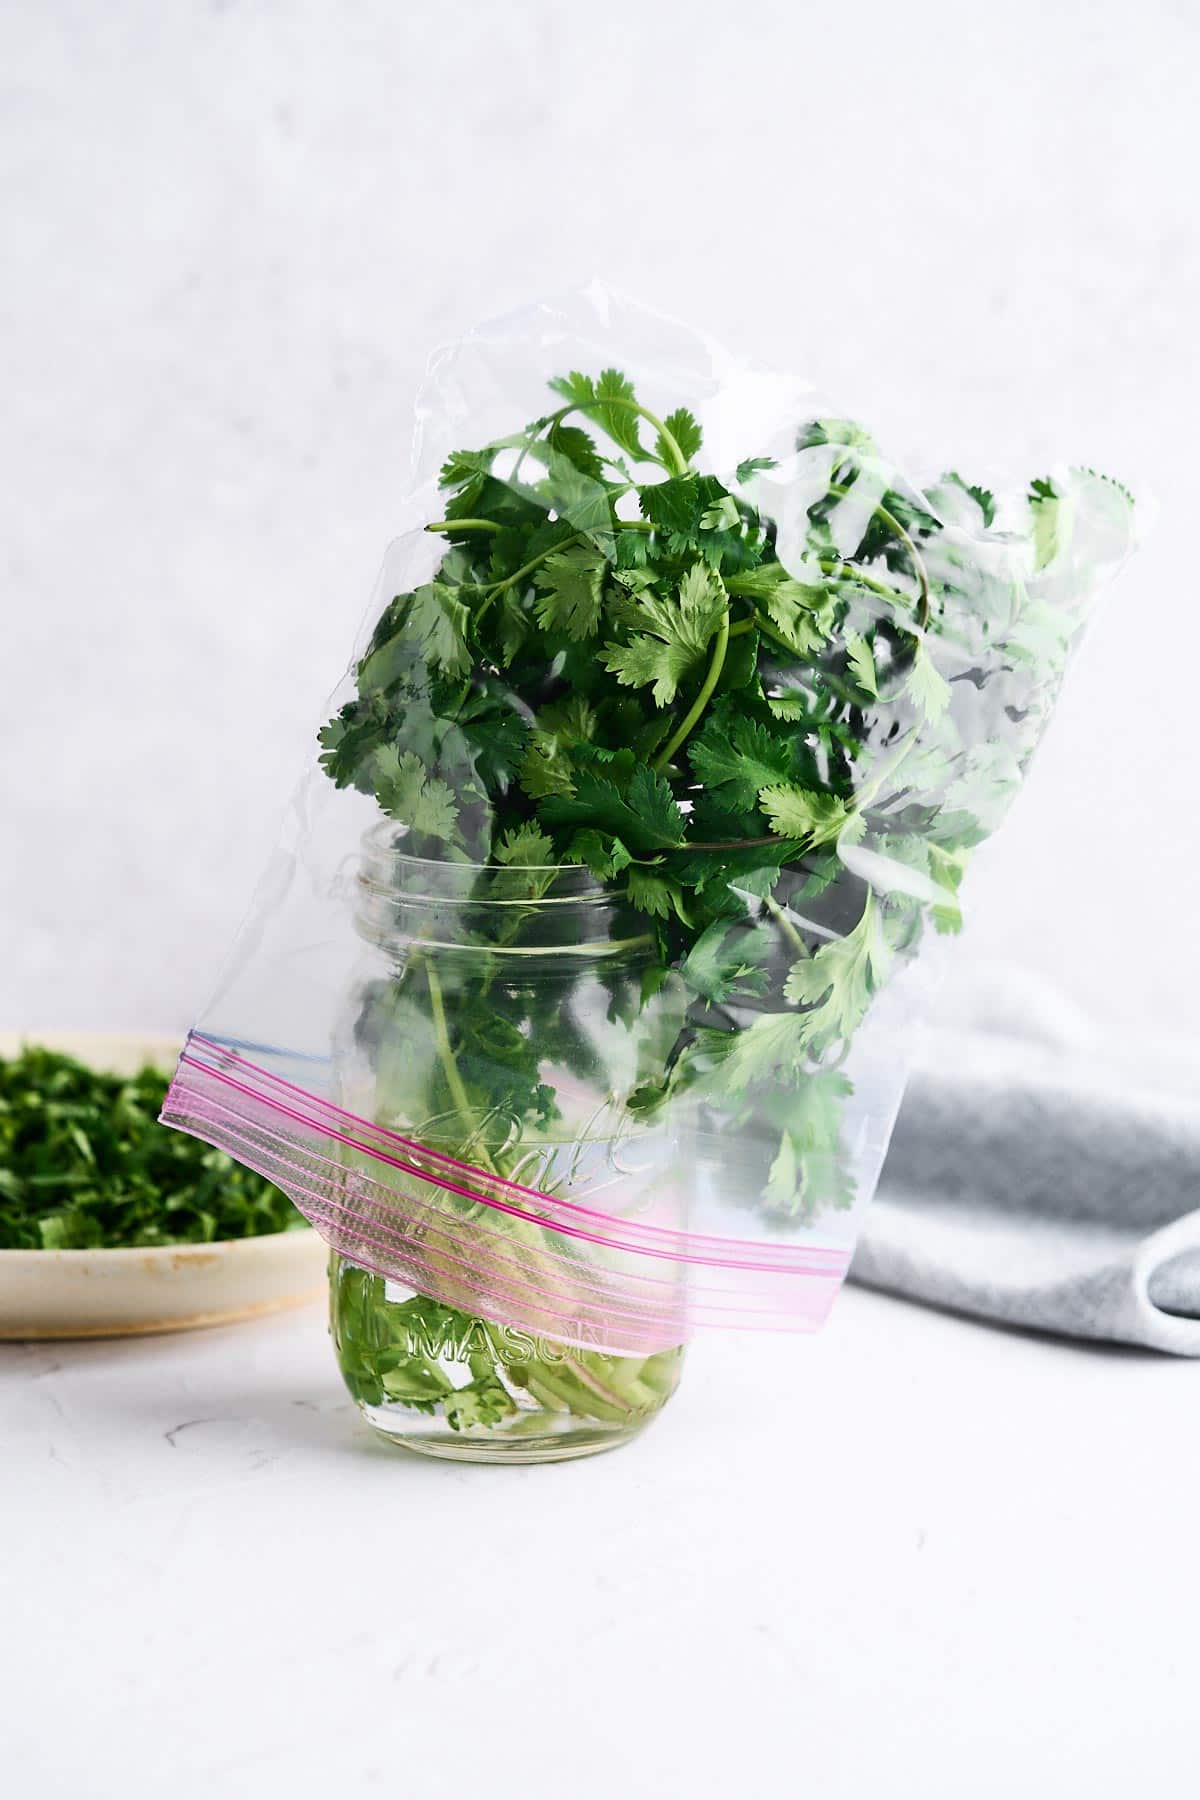 Cilantro in a jar of water.